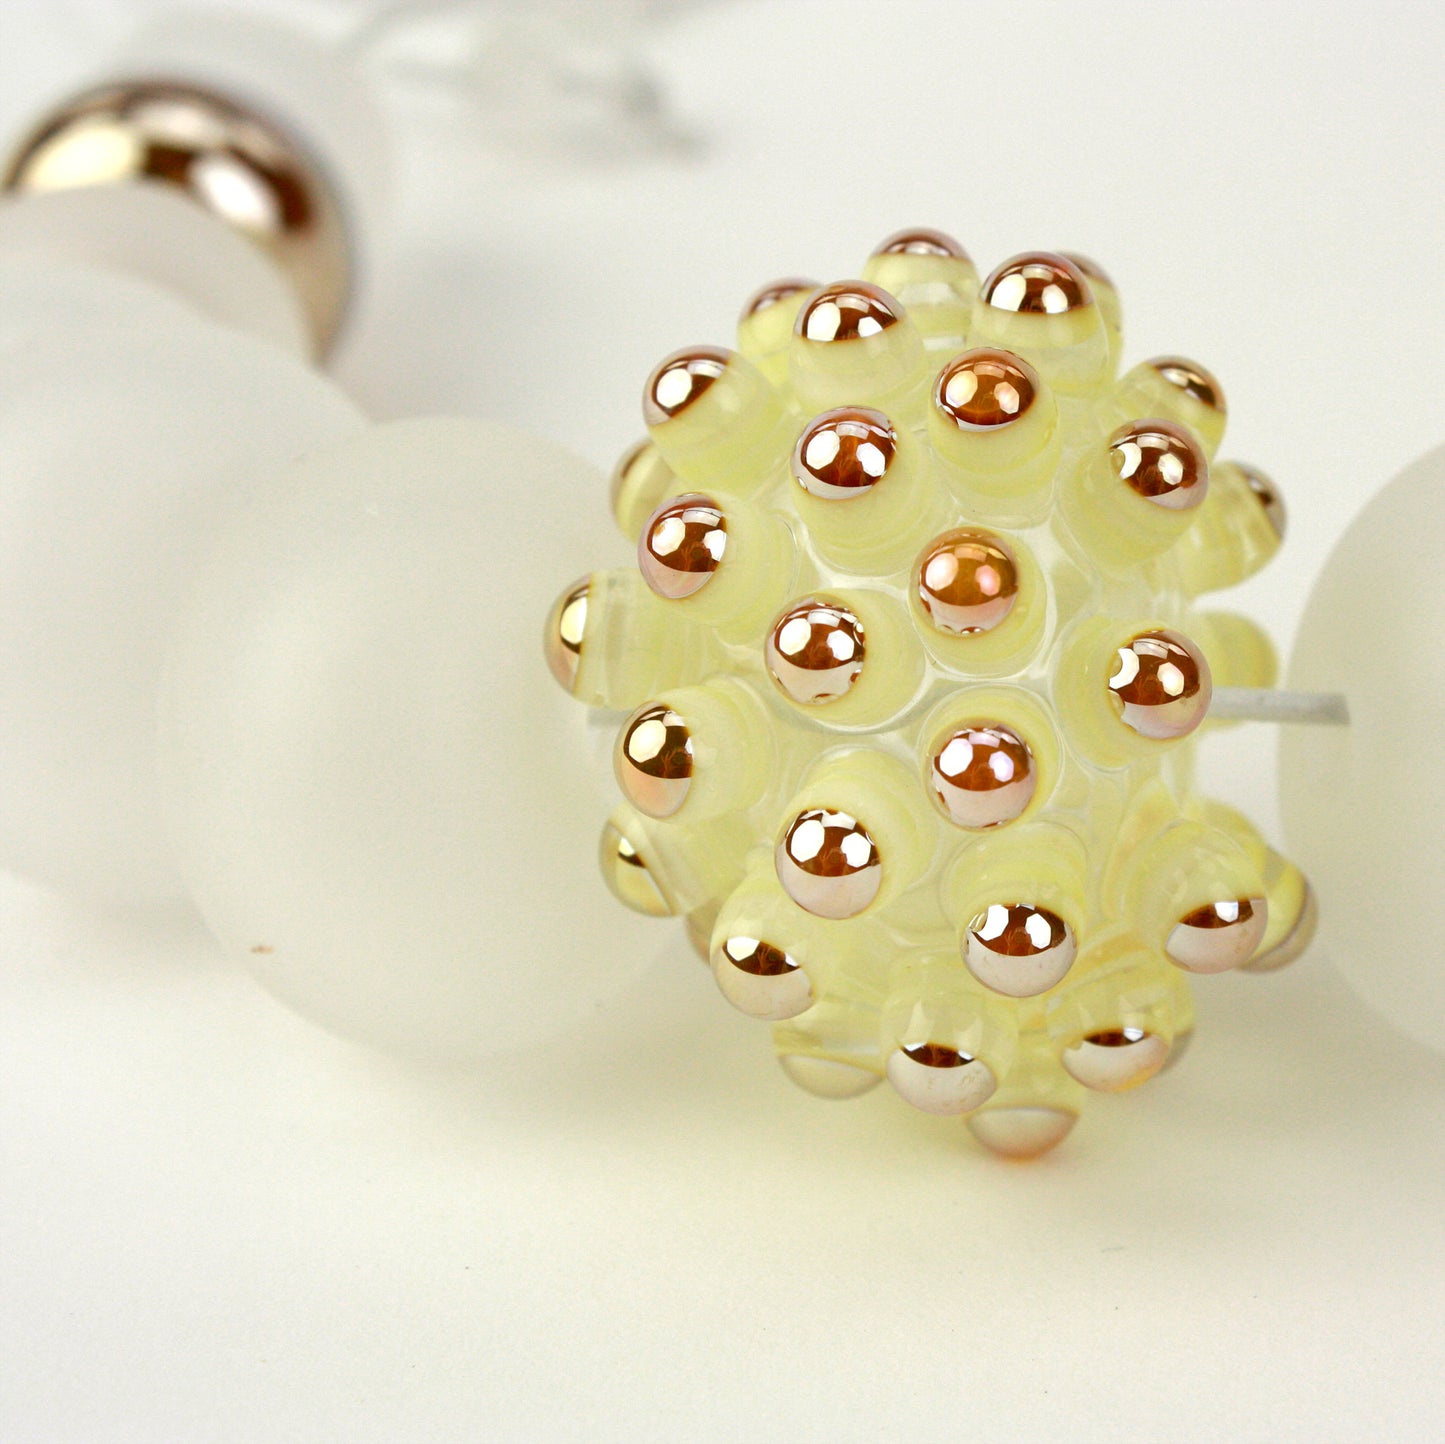 Stacked dot necklace -White and gold